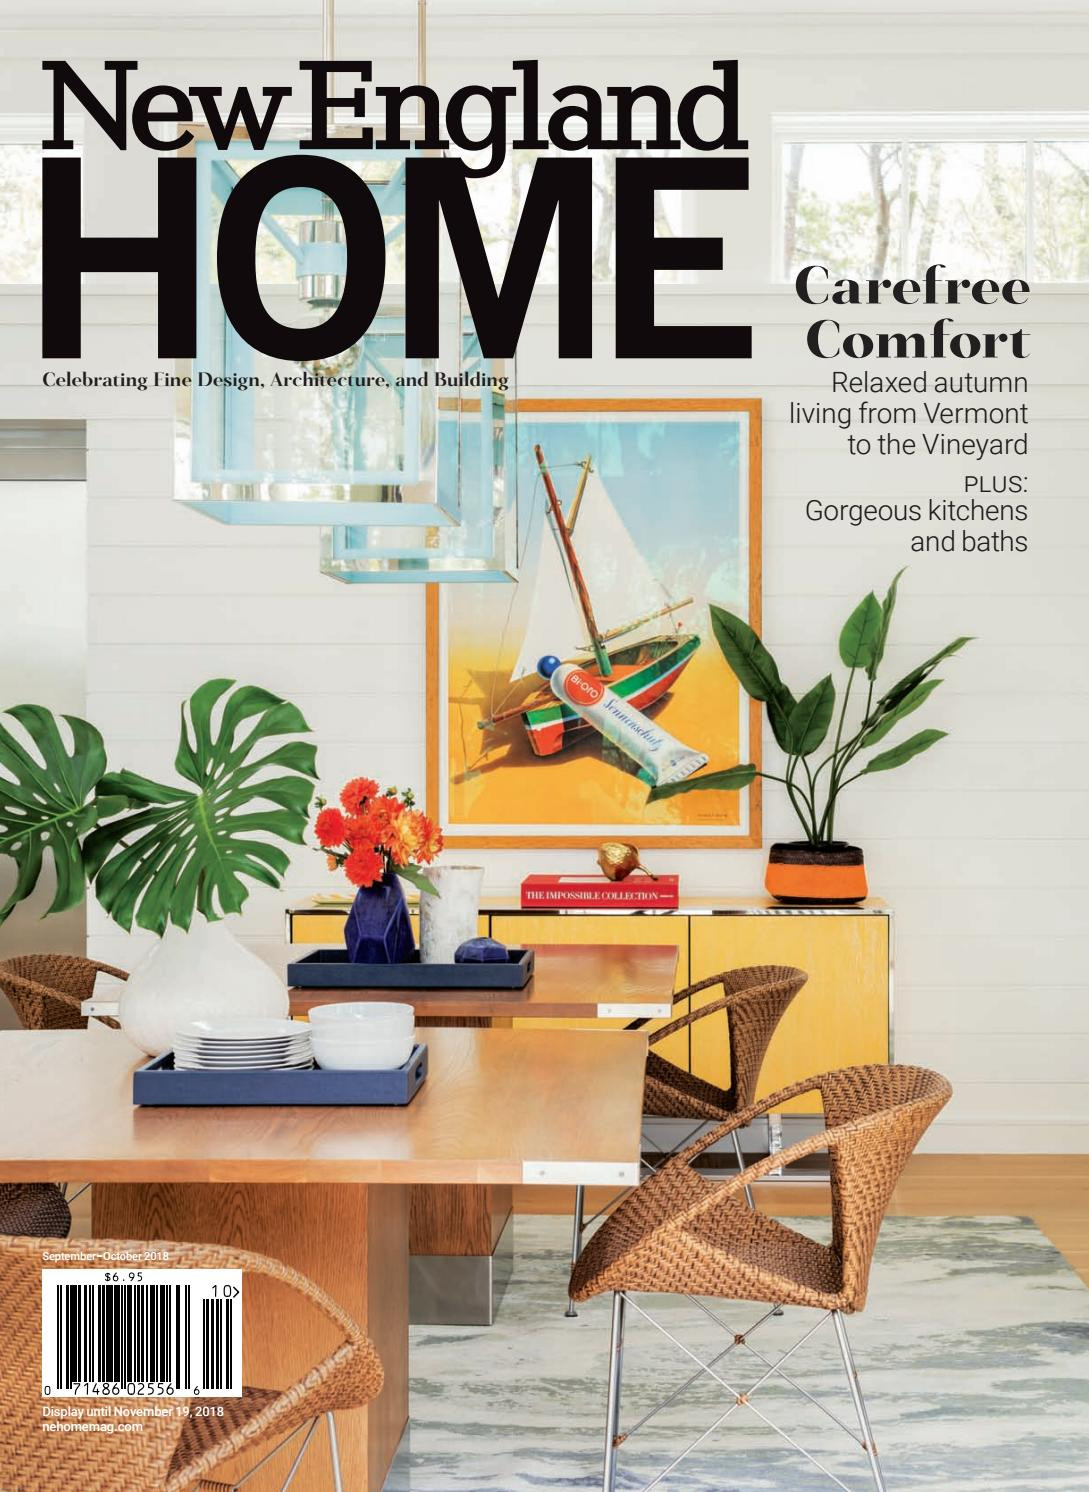 16 Unique Hardwood Floor Refinishing Concord Nh 2024 free download hardwood floor refinishing concord nh of new england home september october 2018 by new england home for new england home september october 2018 by new england home magazine llc issuu